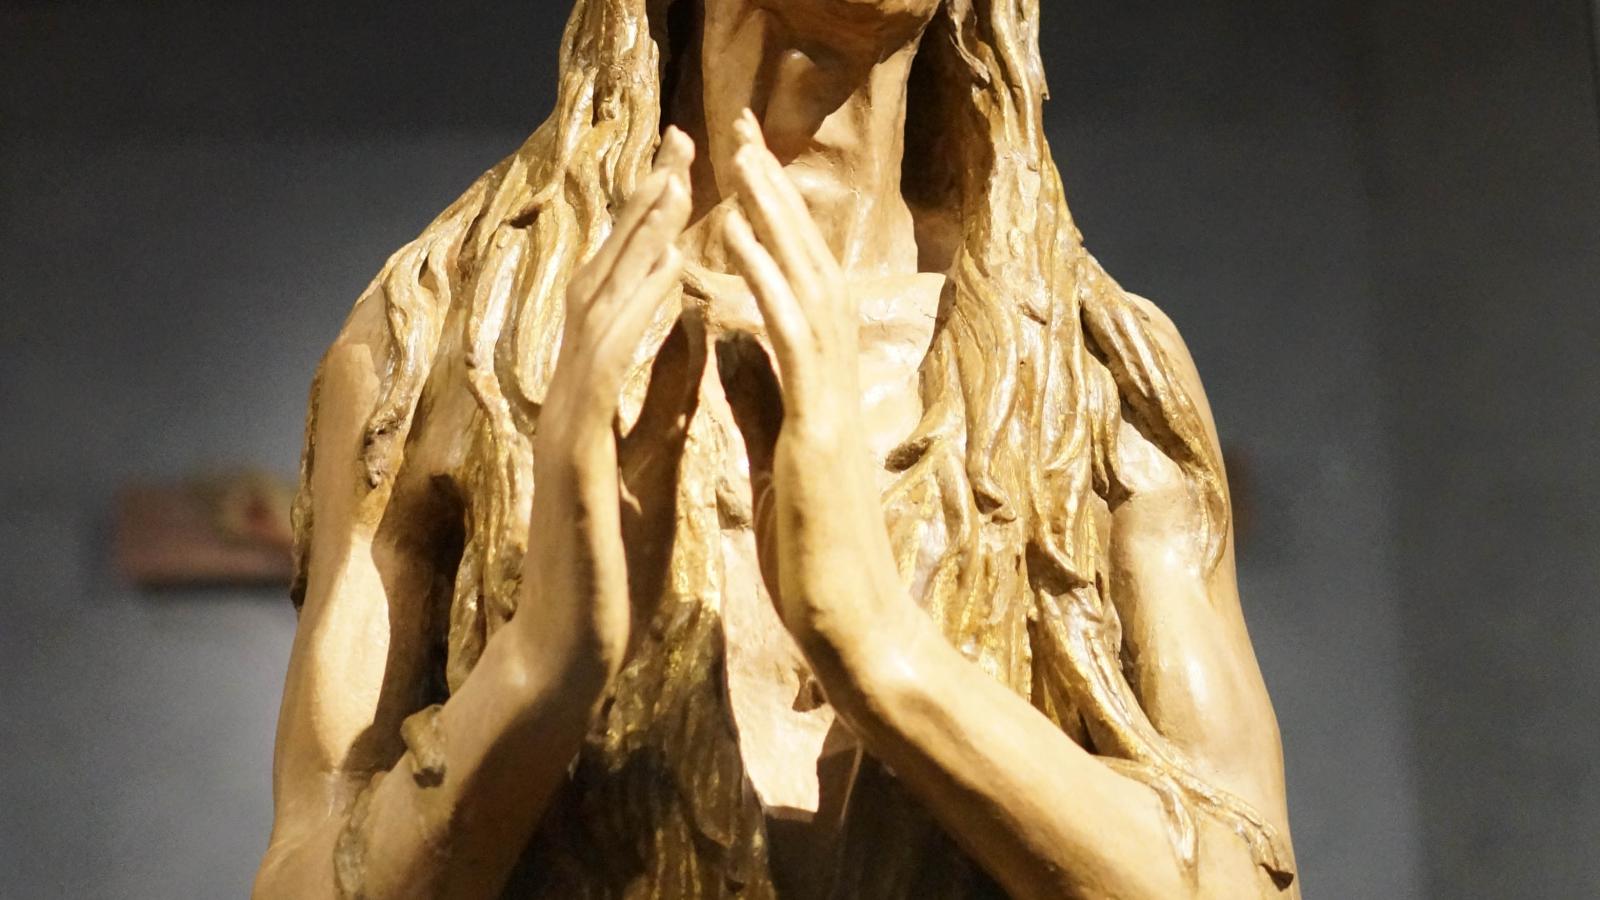 Image of a praying wooden sculpture.